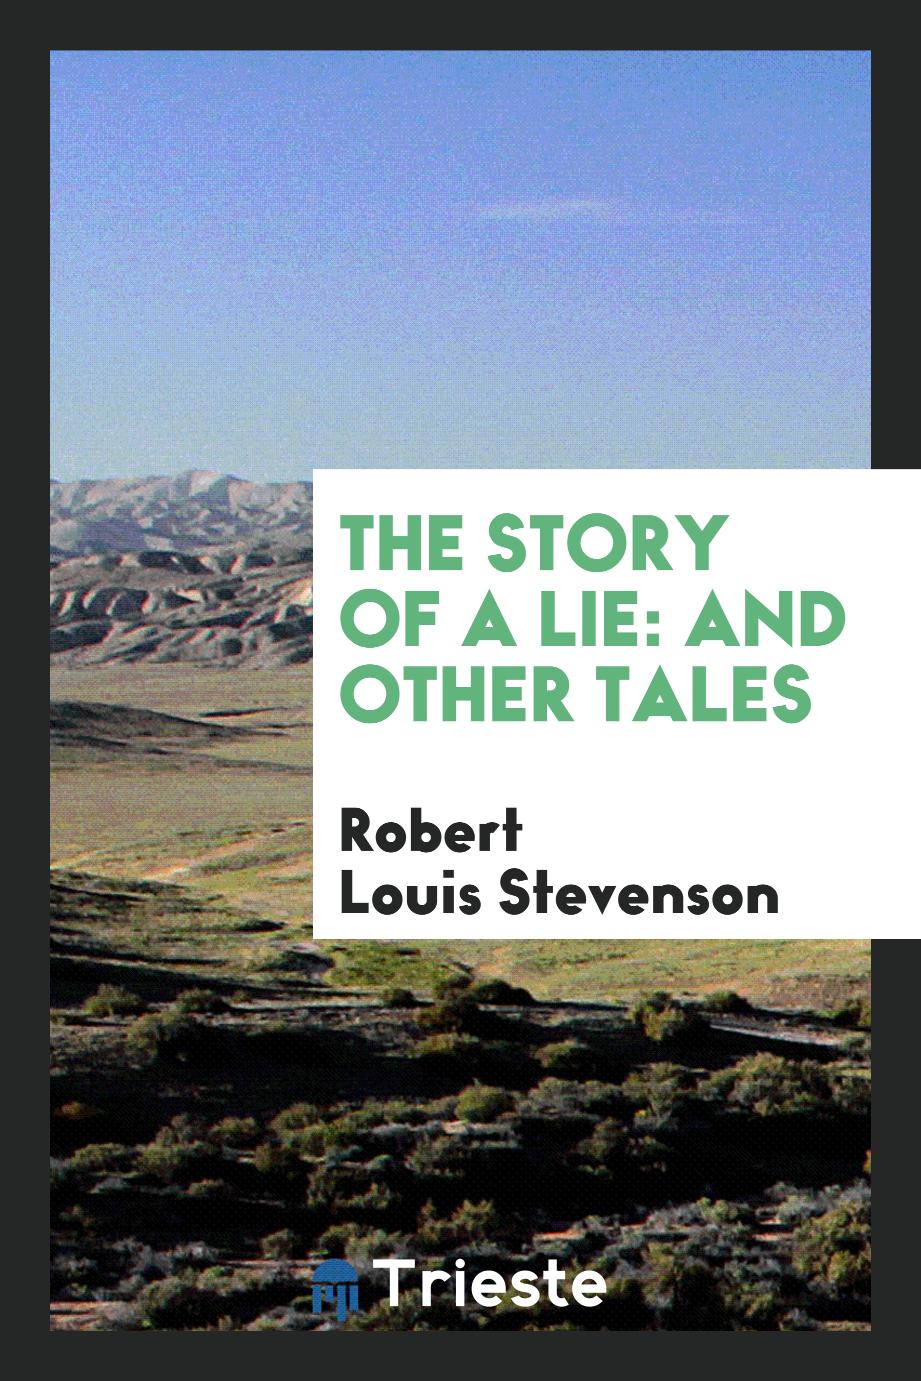 The Story of a Lie: And Other Tales